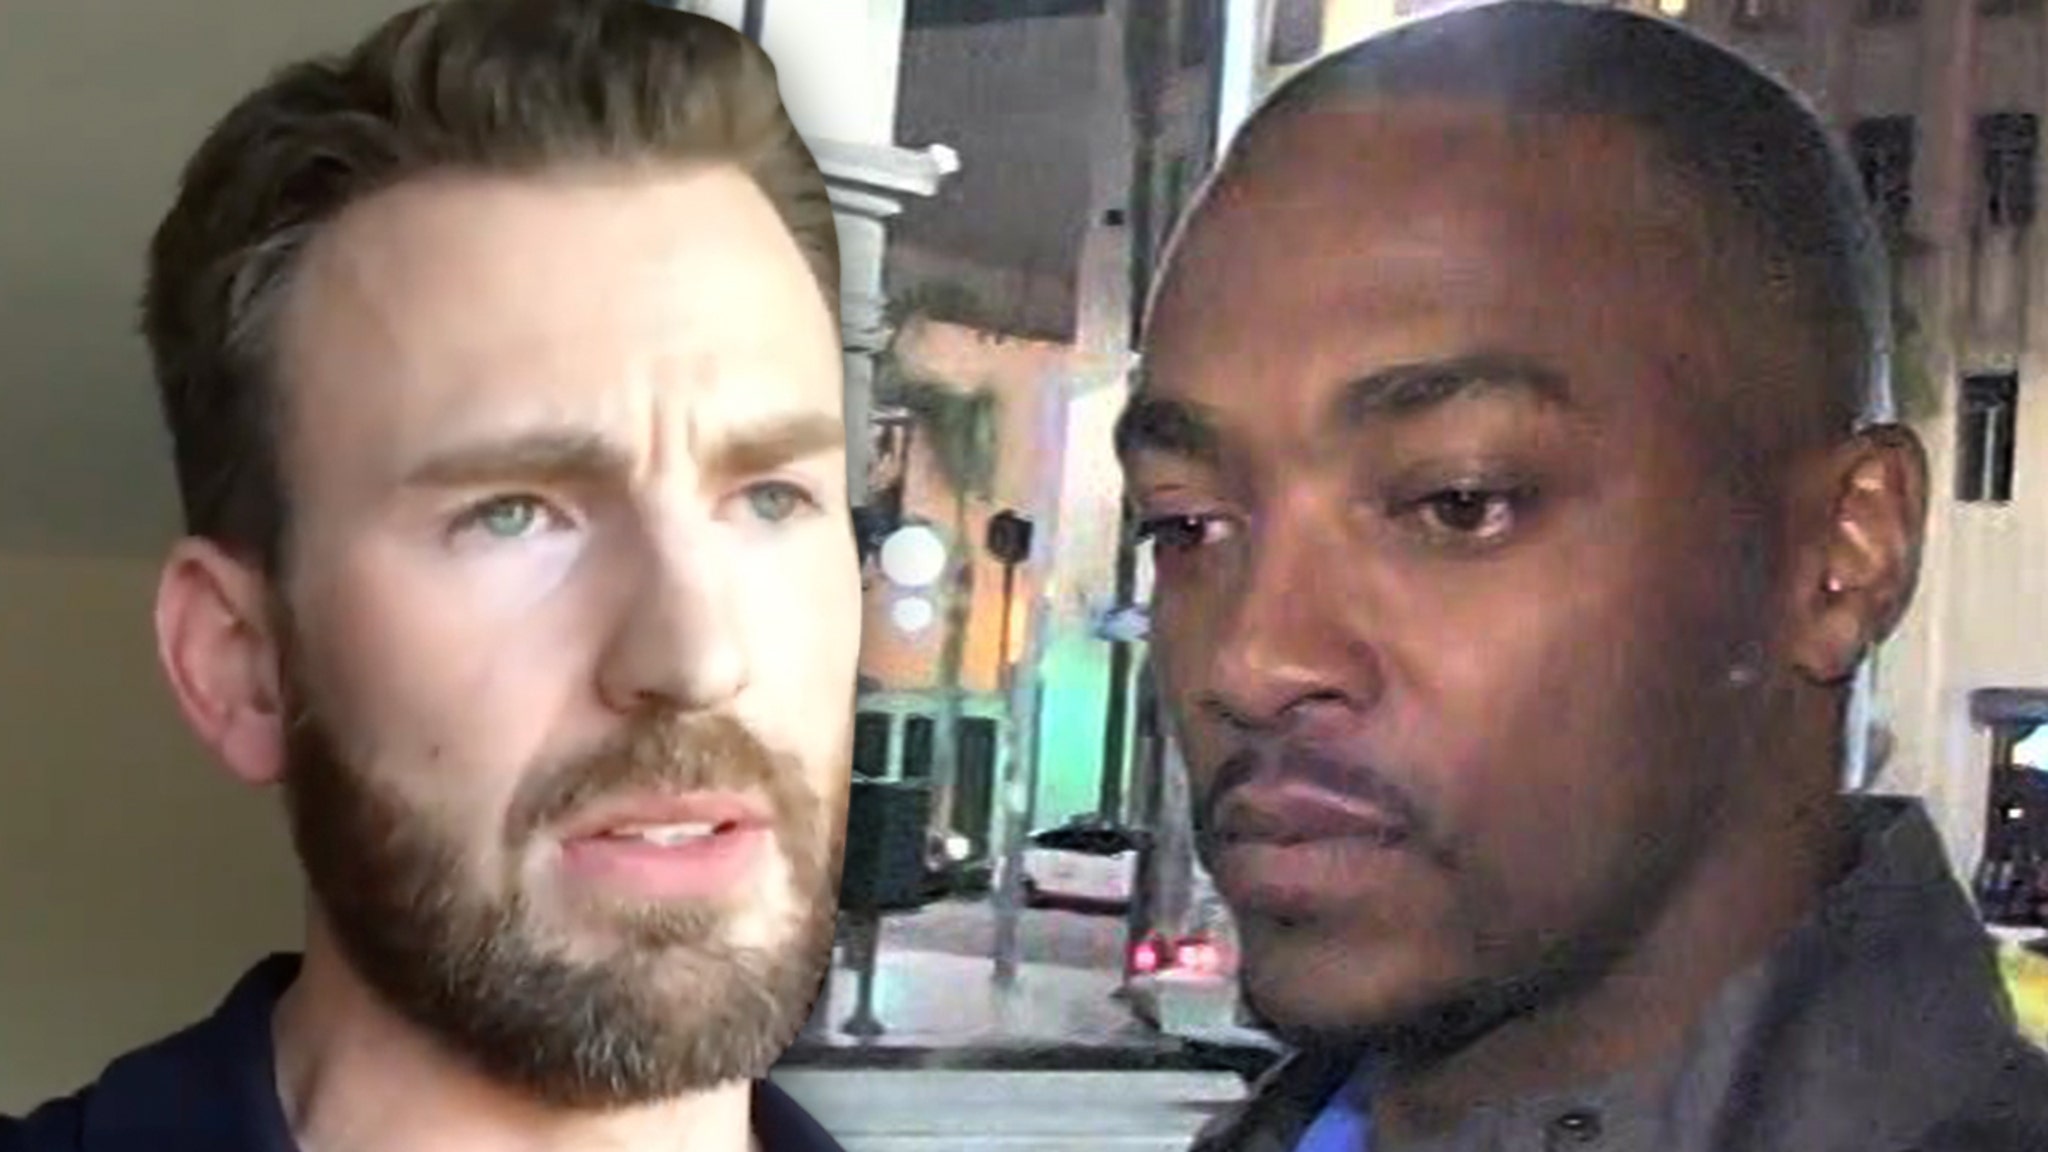 Chris Evans Defends Anthony Mackie as Captain America Going Forward